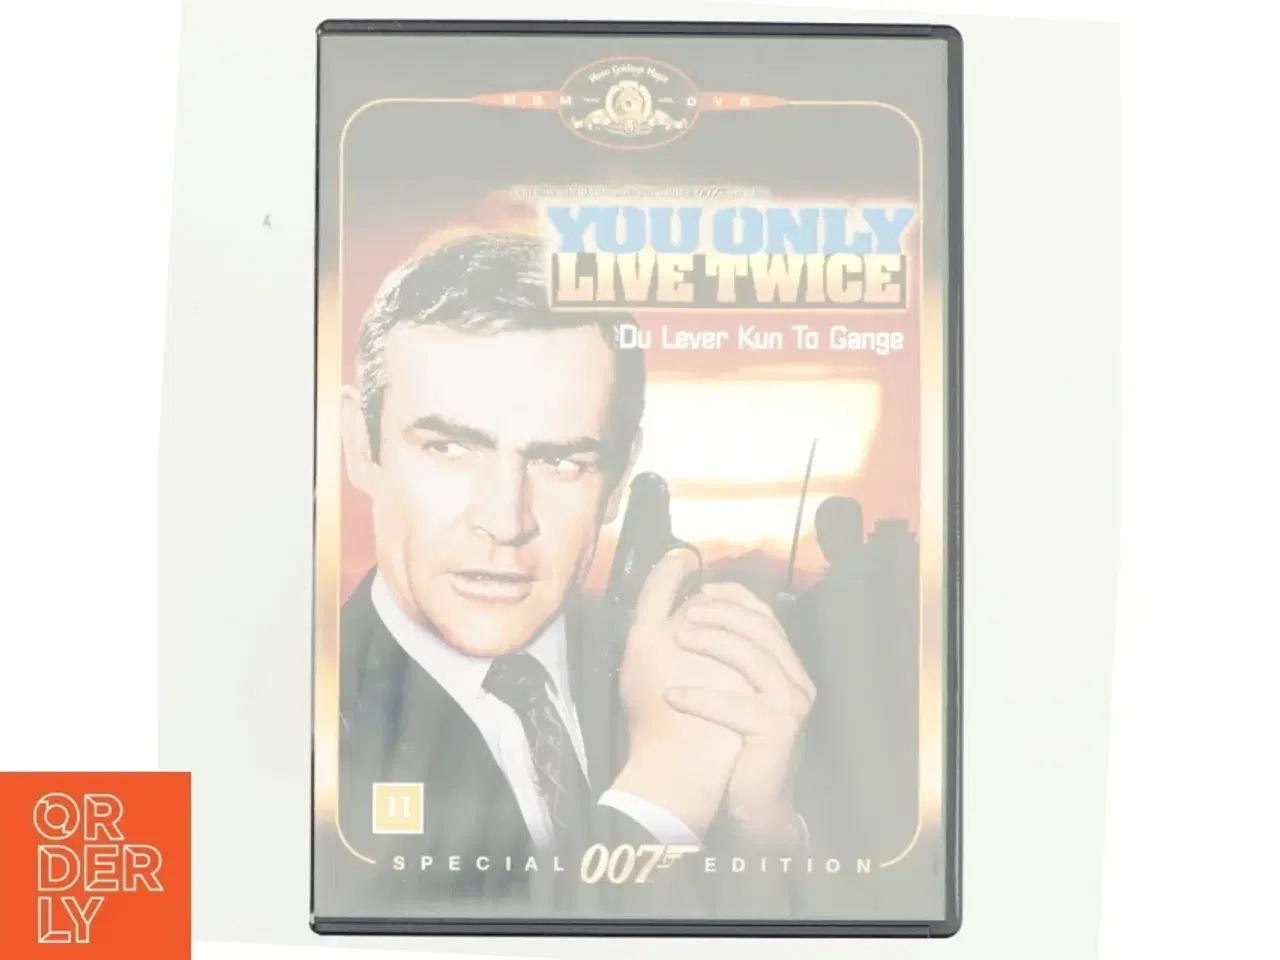 Billede 1 - Agent 007 - You Only Live Twice